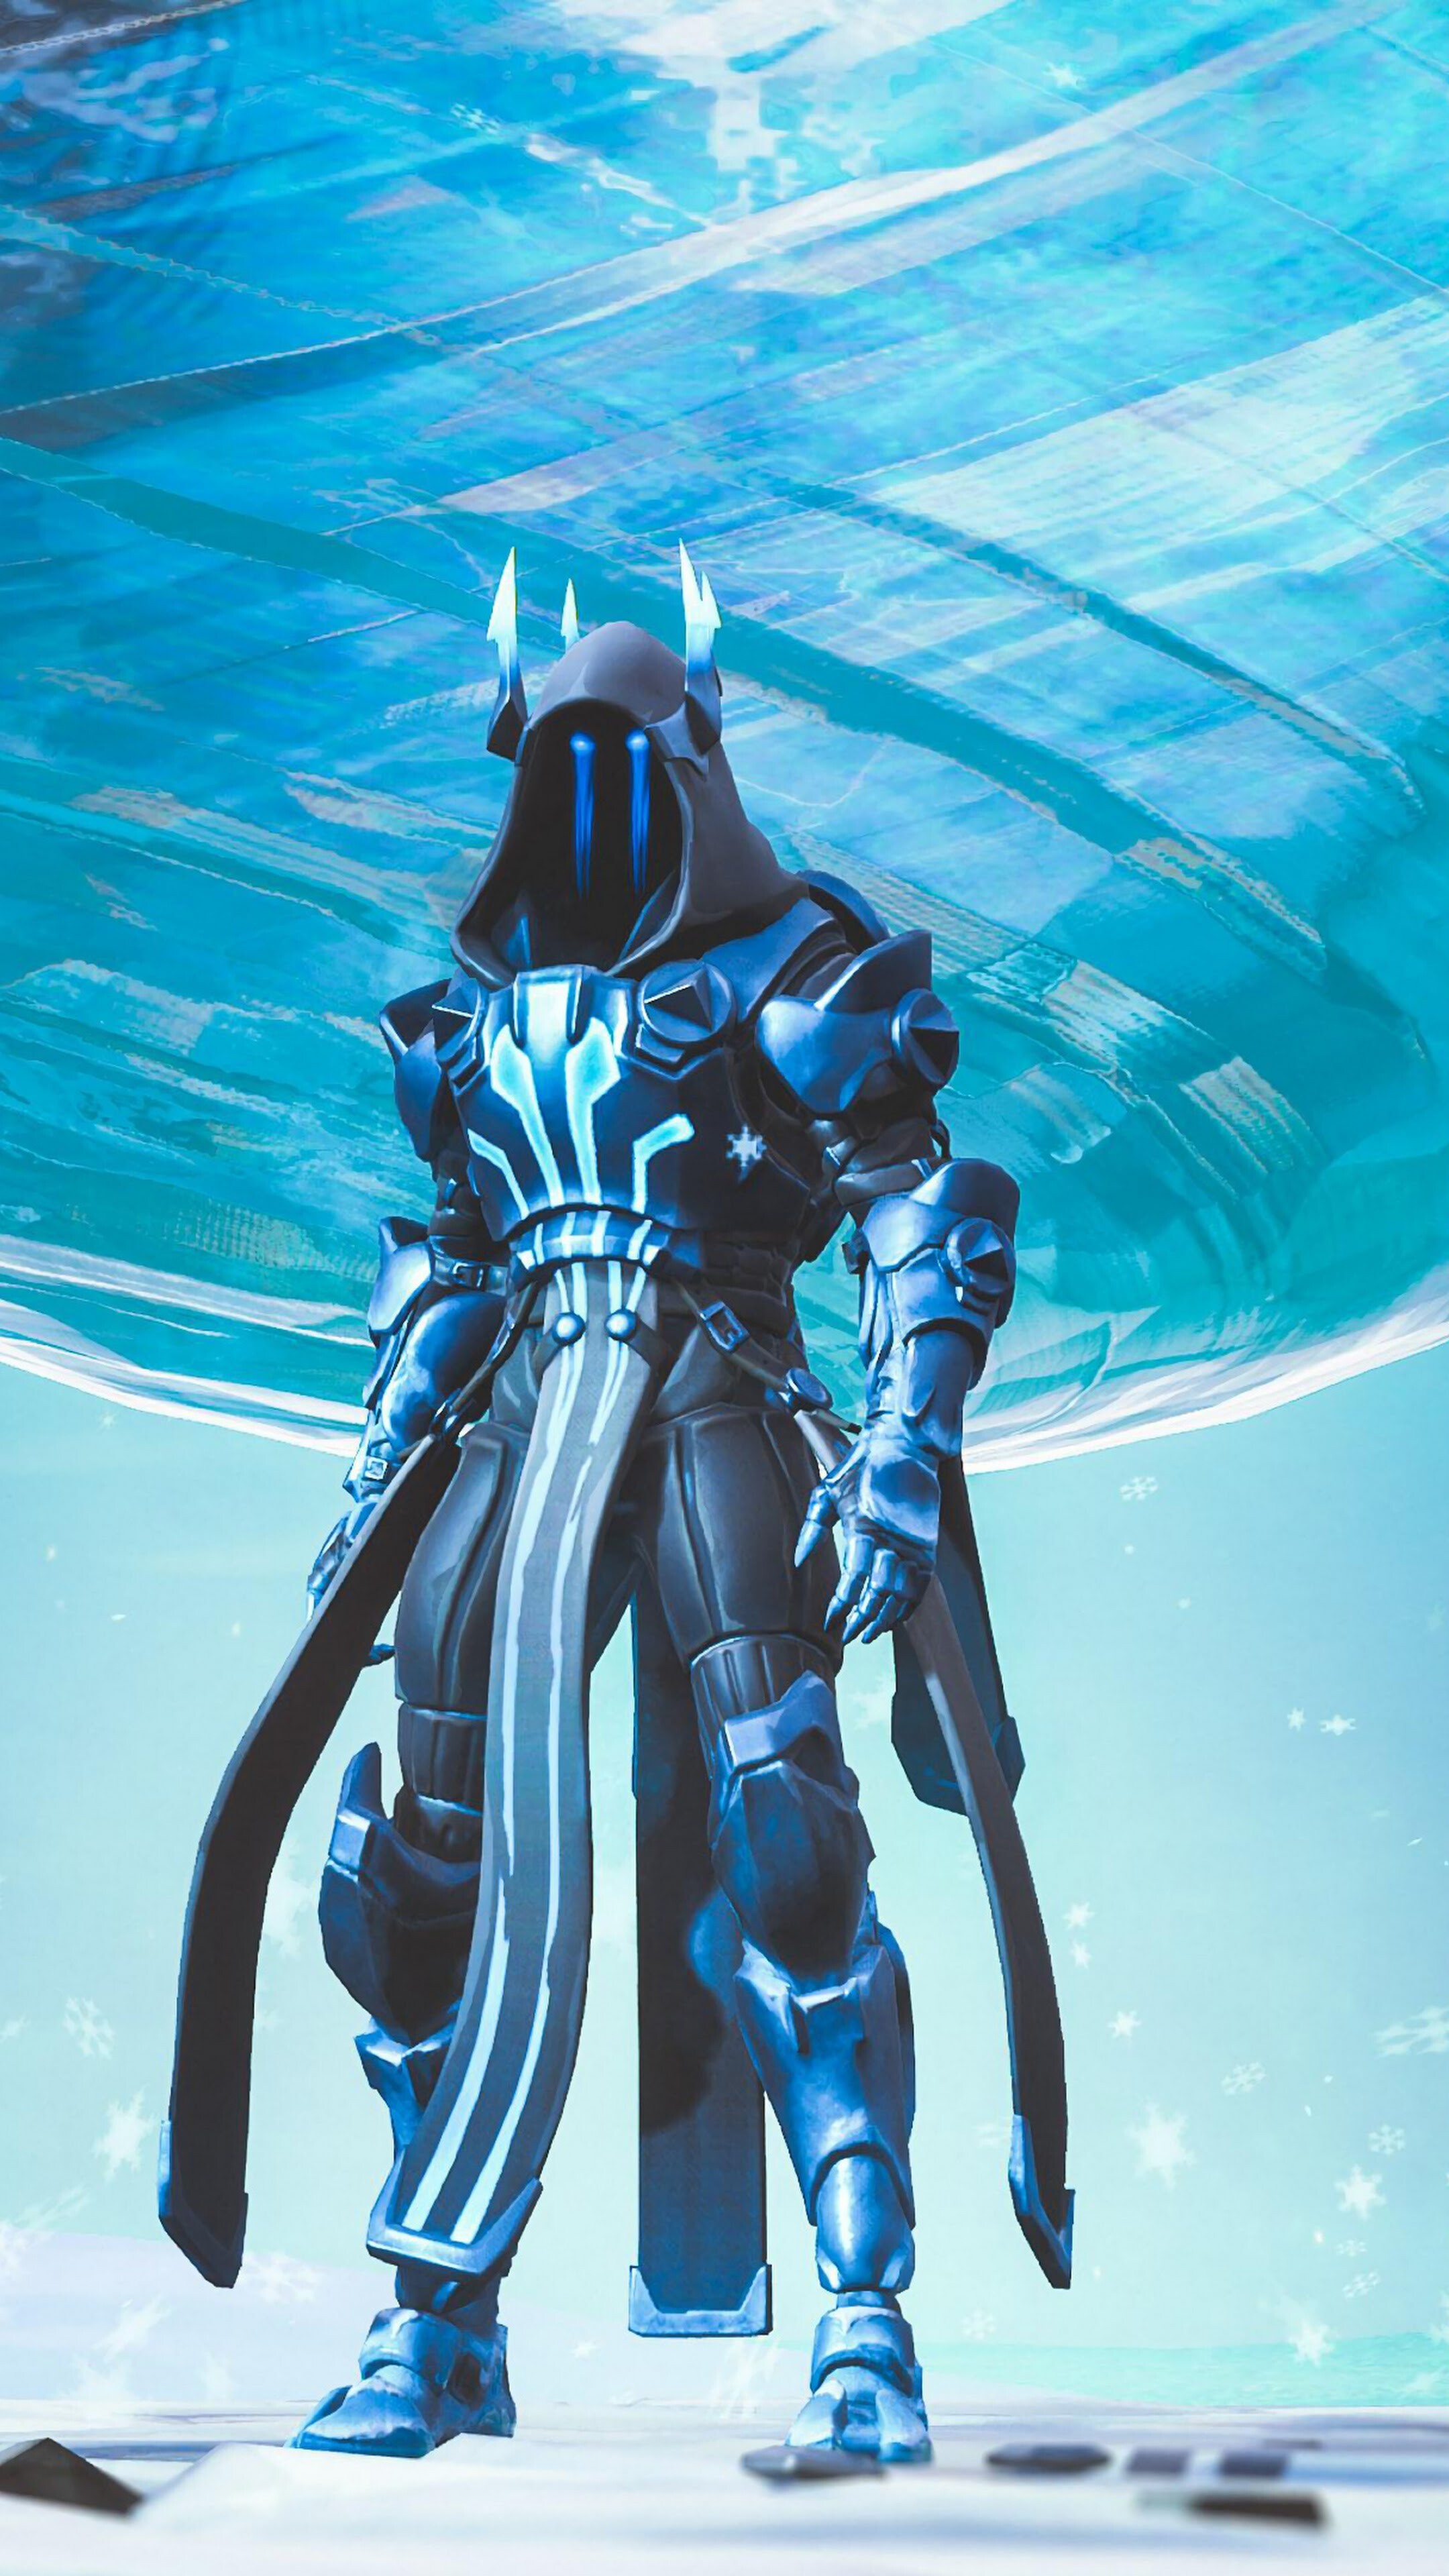 Fortnite: The Ice King, A Legendary Outfit that could be unlocked at Tier 100 of the Season 7 Battle Pass. 2160x3840 4K Background.